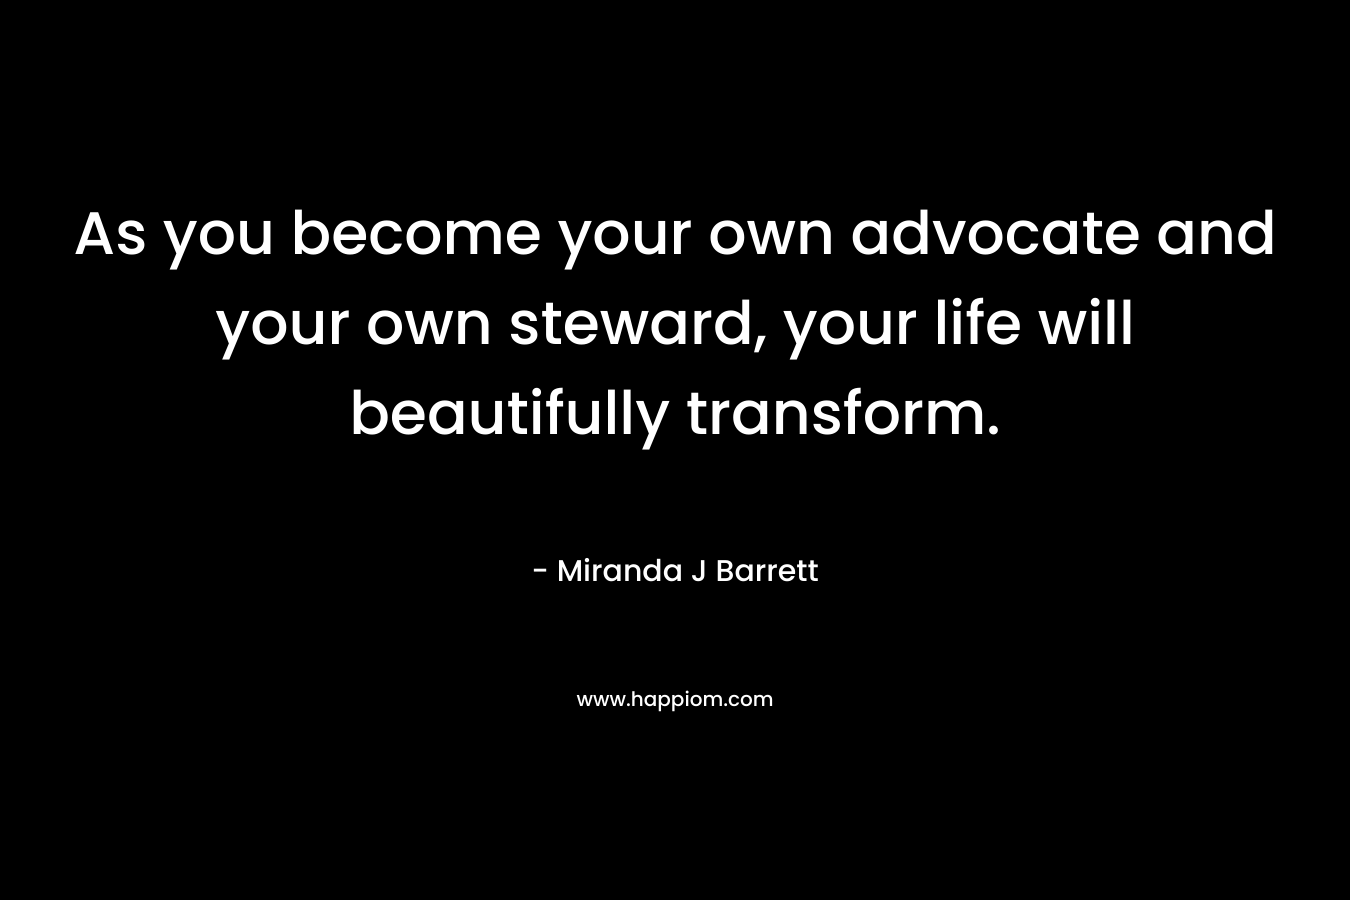 As you become your own advocate and your own steward, your life will beautifully transform. – Miranda J Barrett